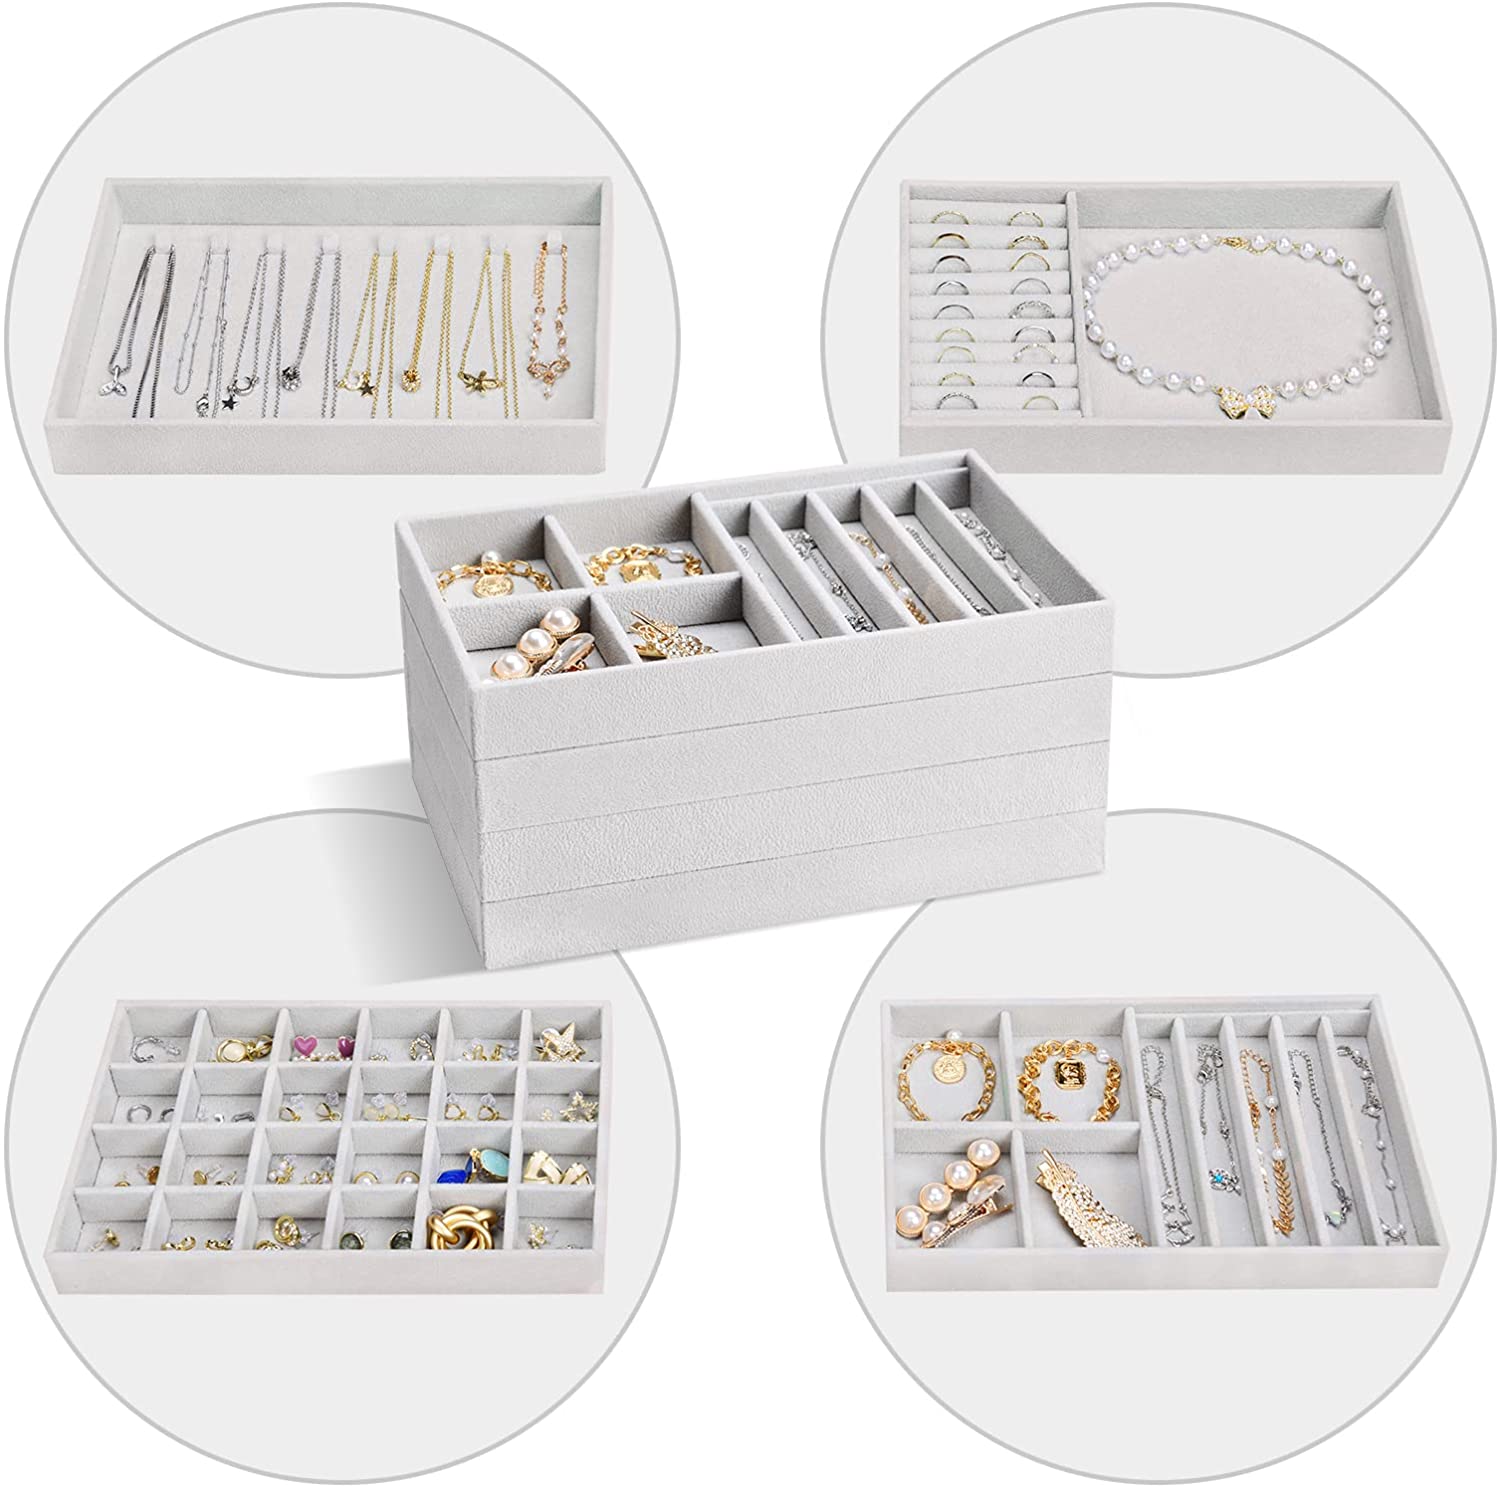 ProCase 3 Stackable Jewelry Trays Organizer Set for Drawers, Jewellery Drawer Insert Divider Jewel Display Storage with Removable Dividers for